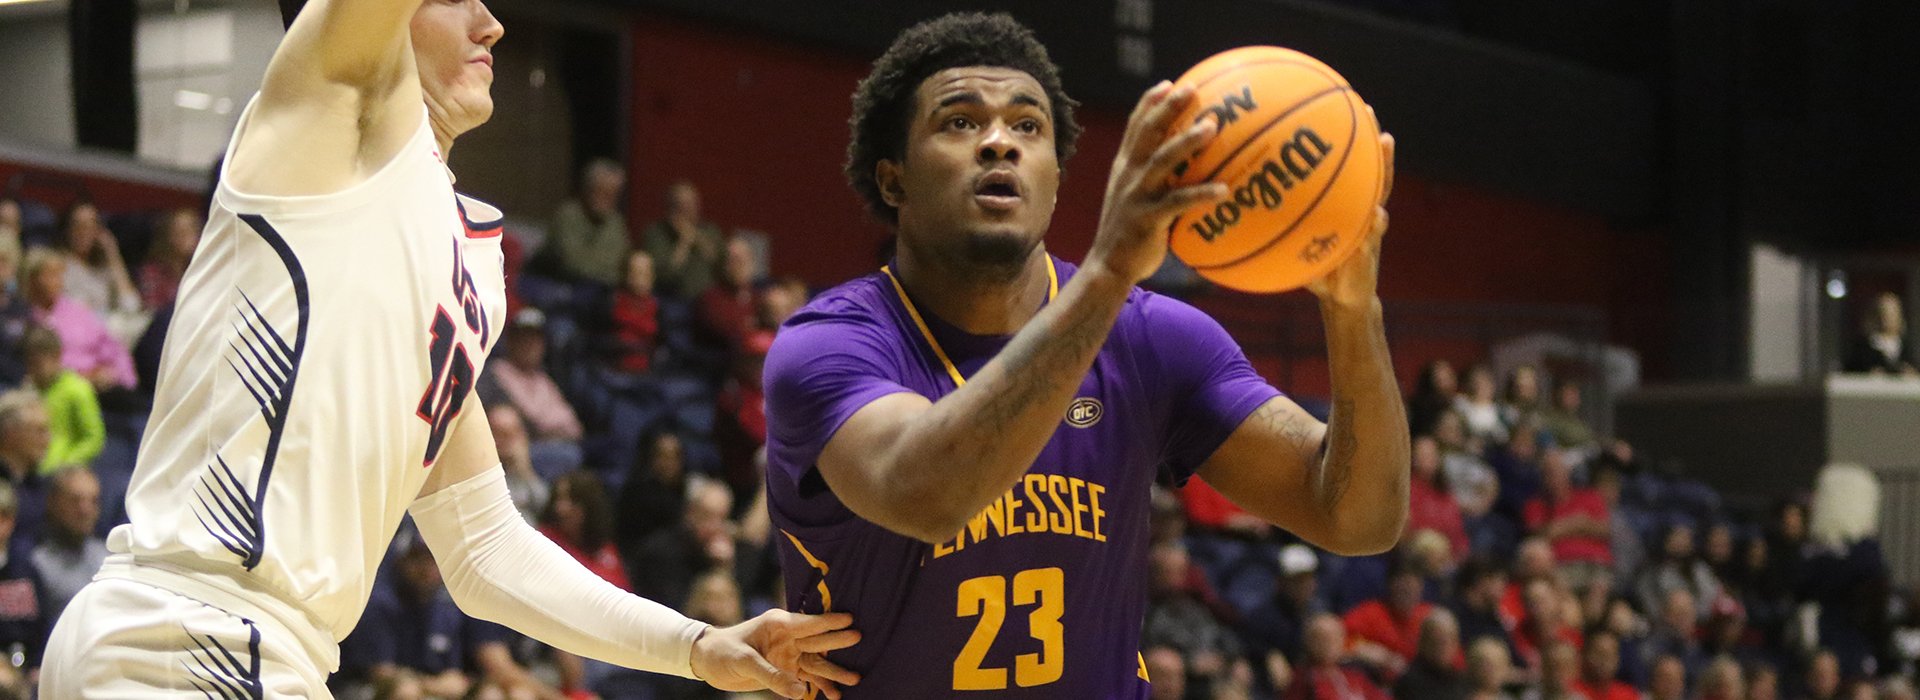 Tech secures first OVC win behind stellar free-throw shooting at USI